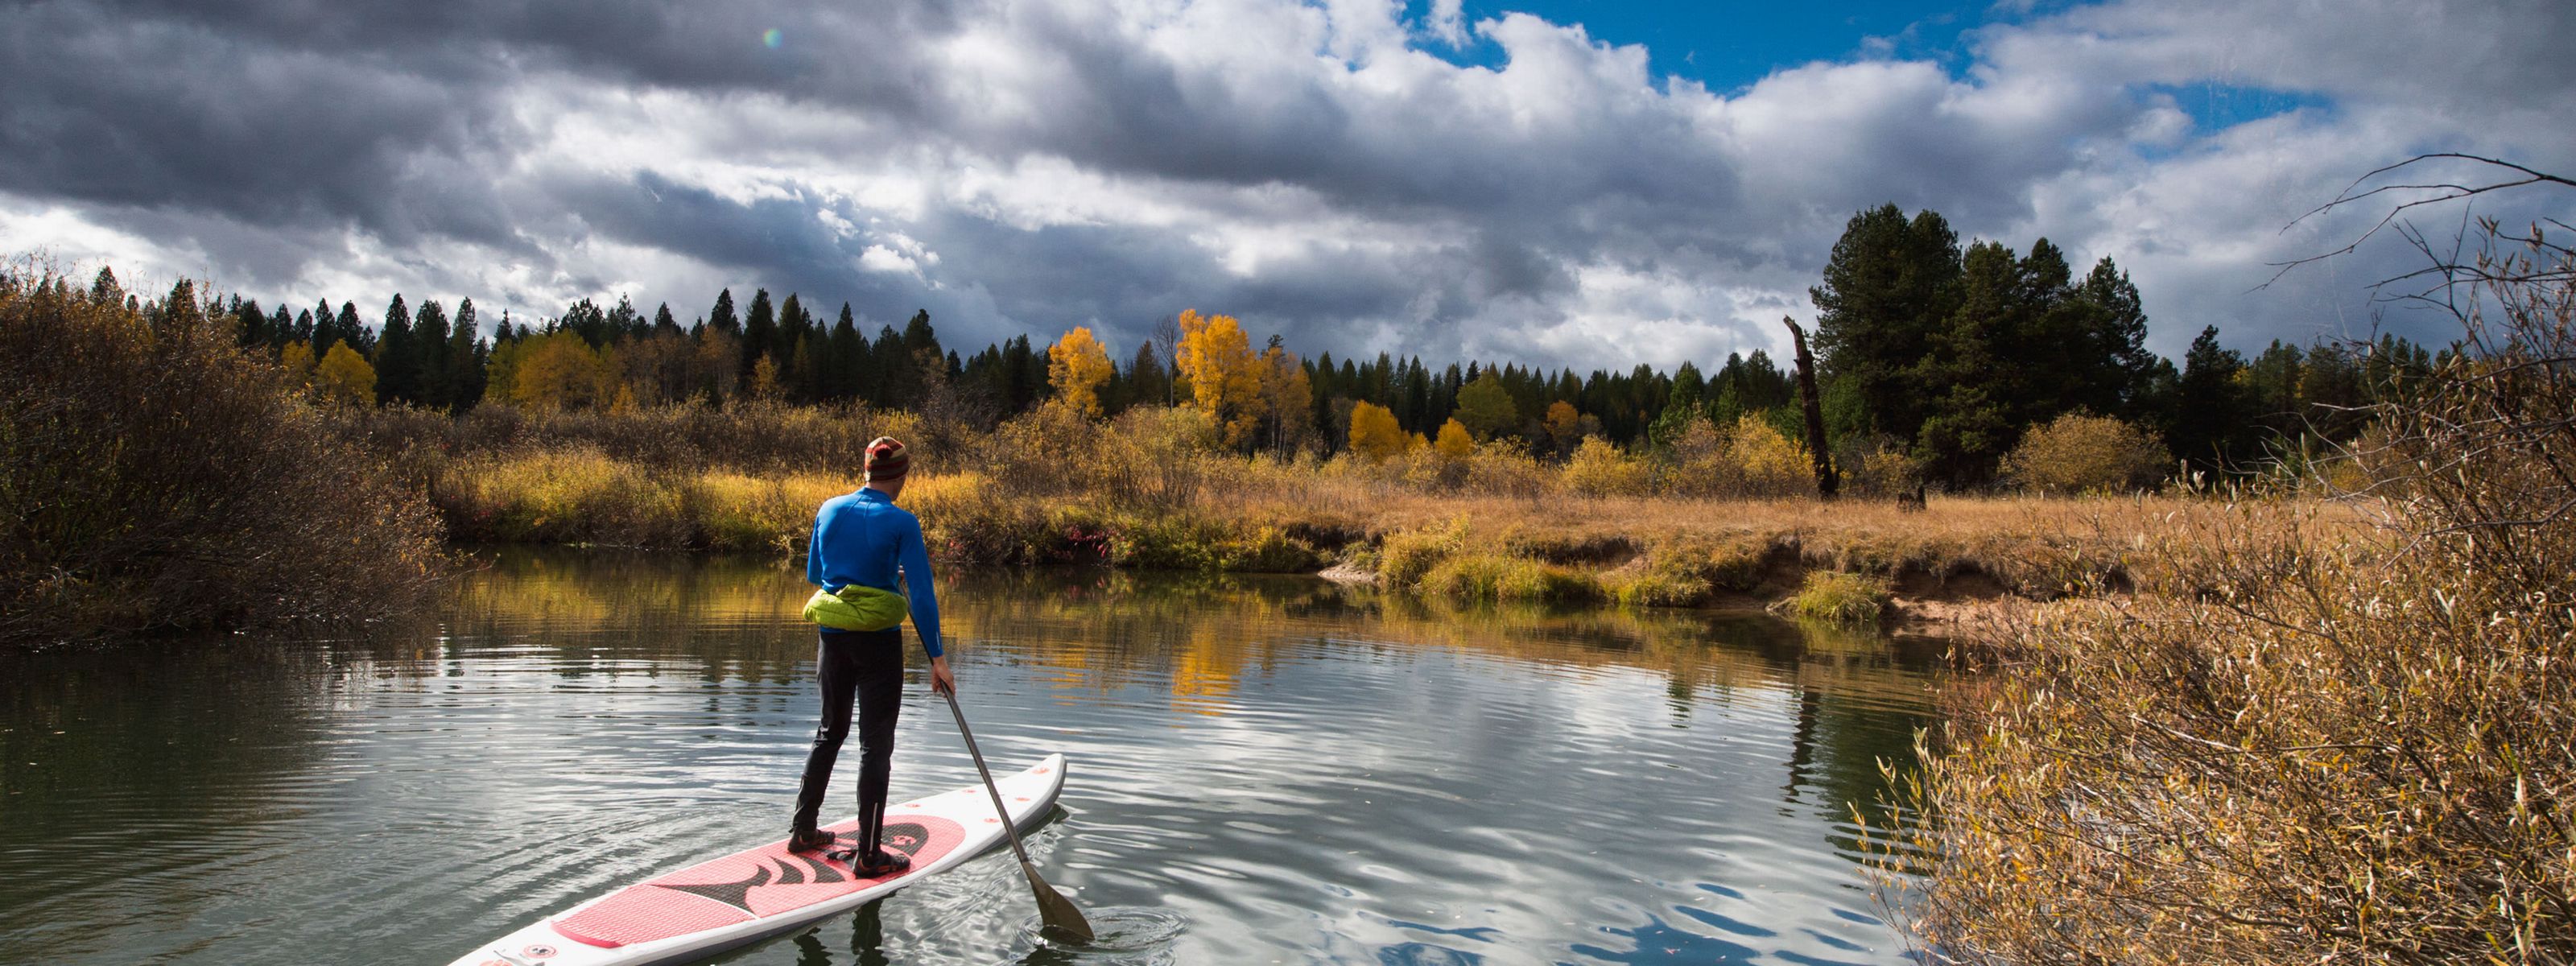 Brandon French paddles along the Clearwater River Canoe trail, Montana.